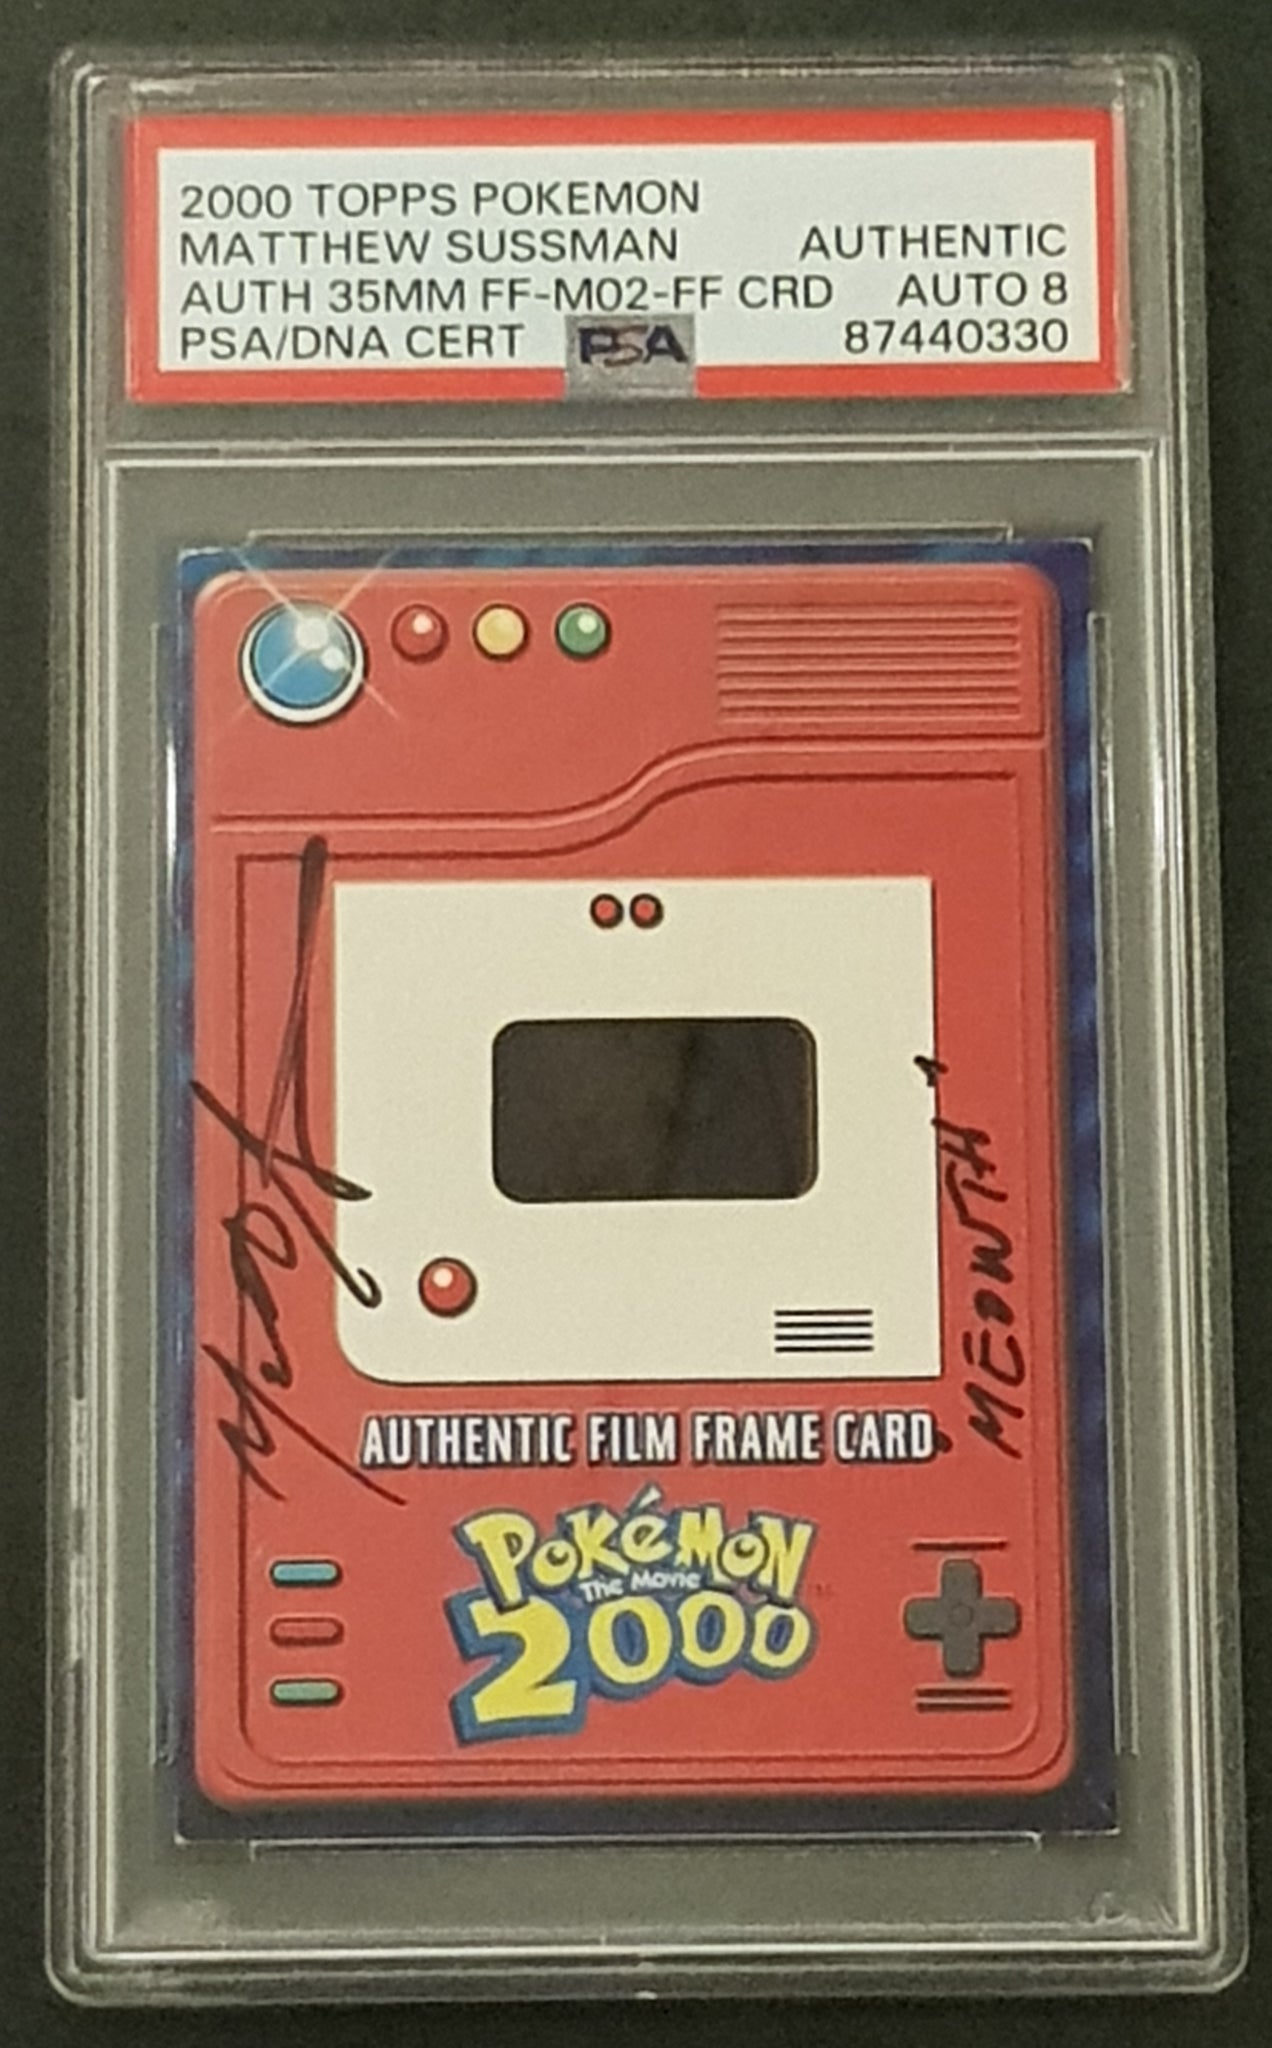 Topps Pokemon the Movie 2000 Authentic 35mm 'Meowth' Film Frame Card PSA Authentic AUTO 8 Insert Card (Signed by Matthew Sussman)